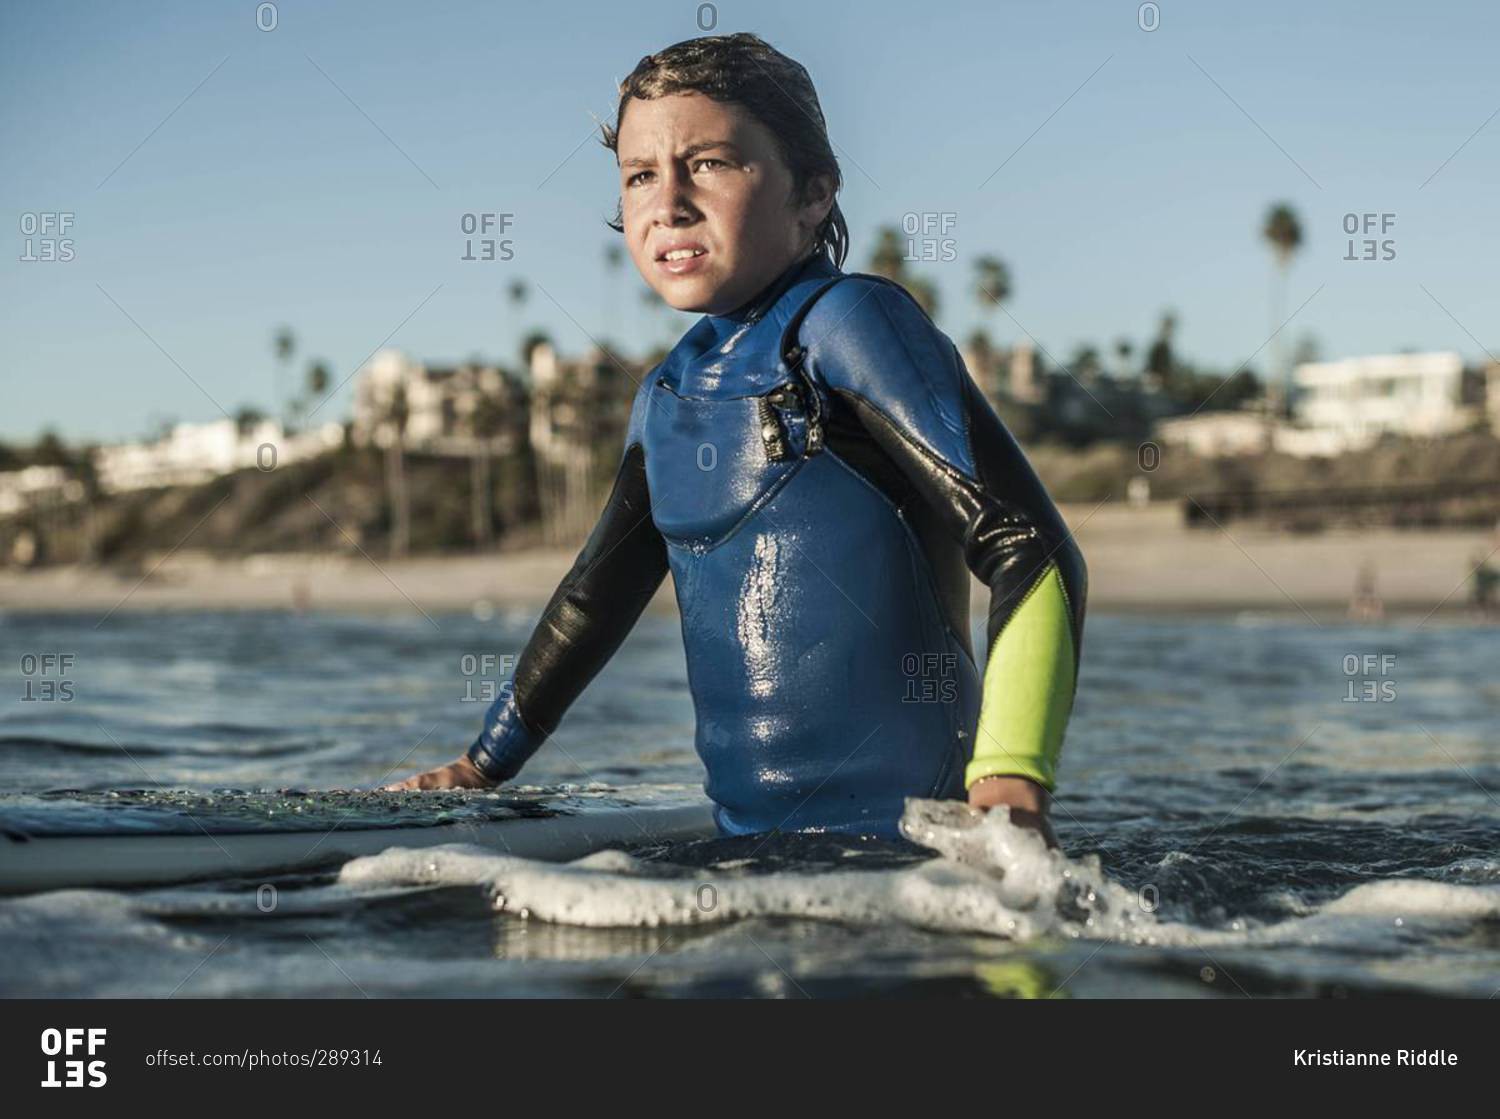 Boy looking out at waves while surfing in San Clemente, California